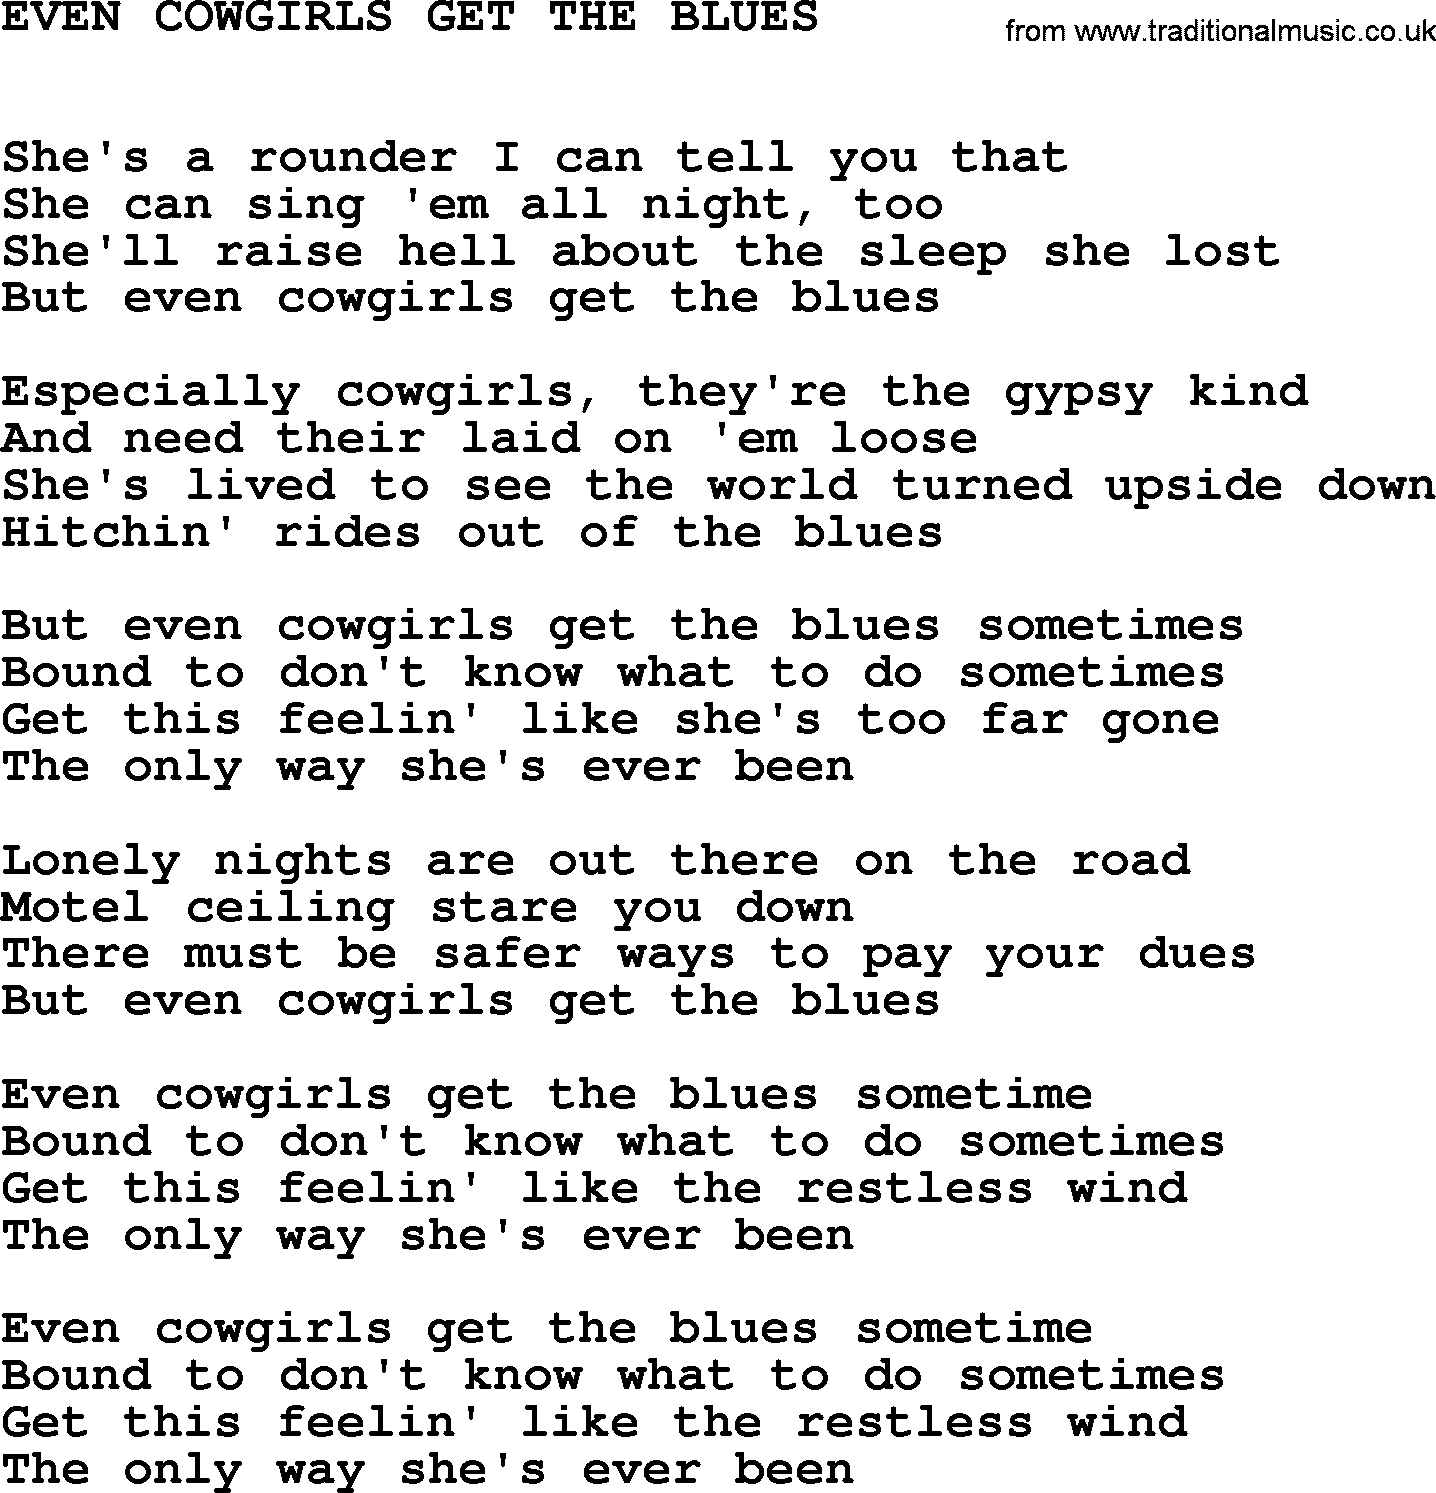 Johnny Cash song Even Cowgirls Get The Blues.txt lyrics